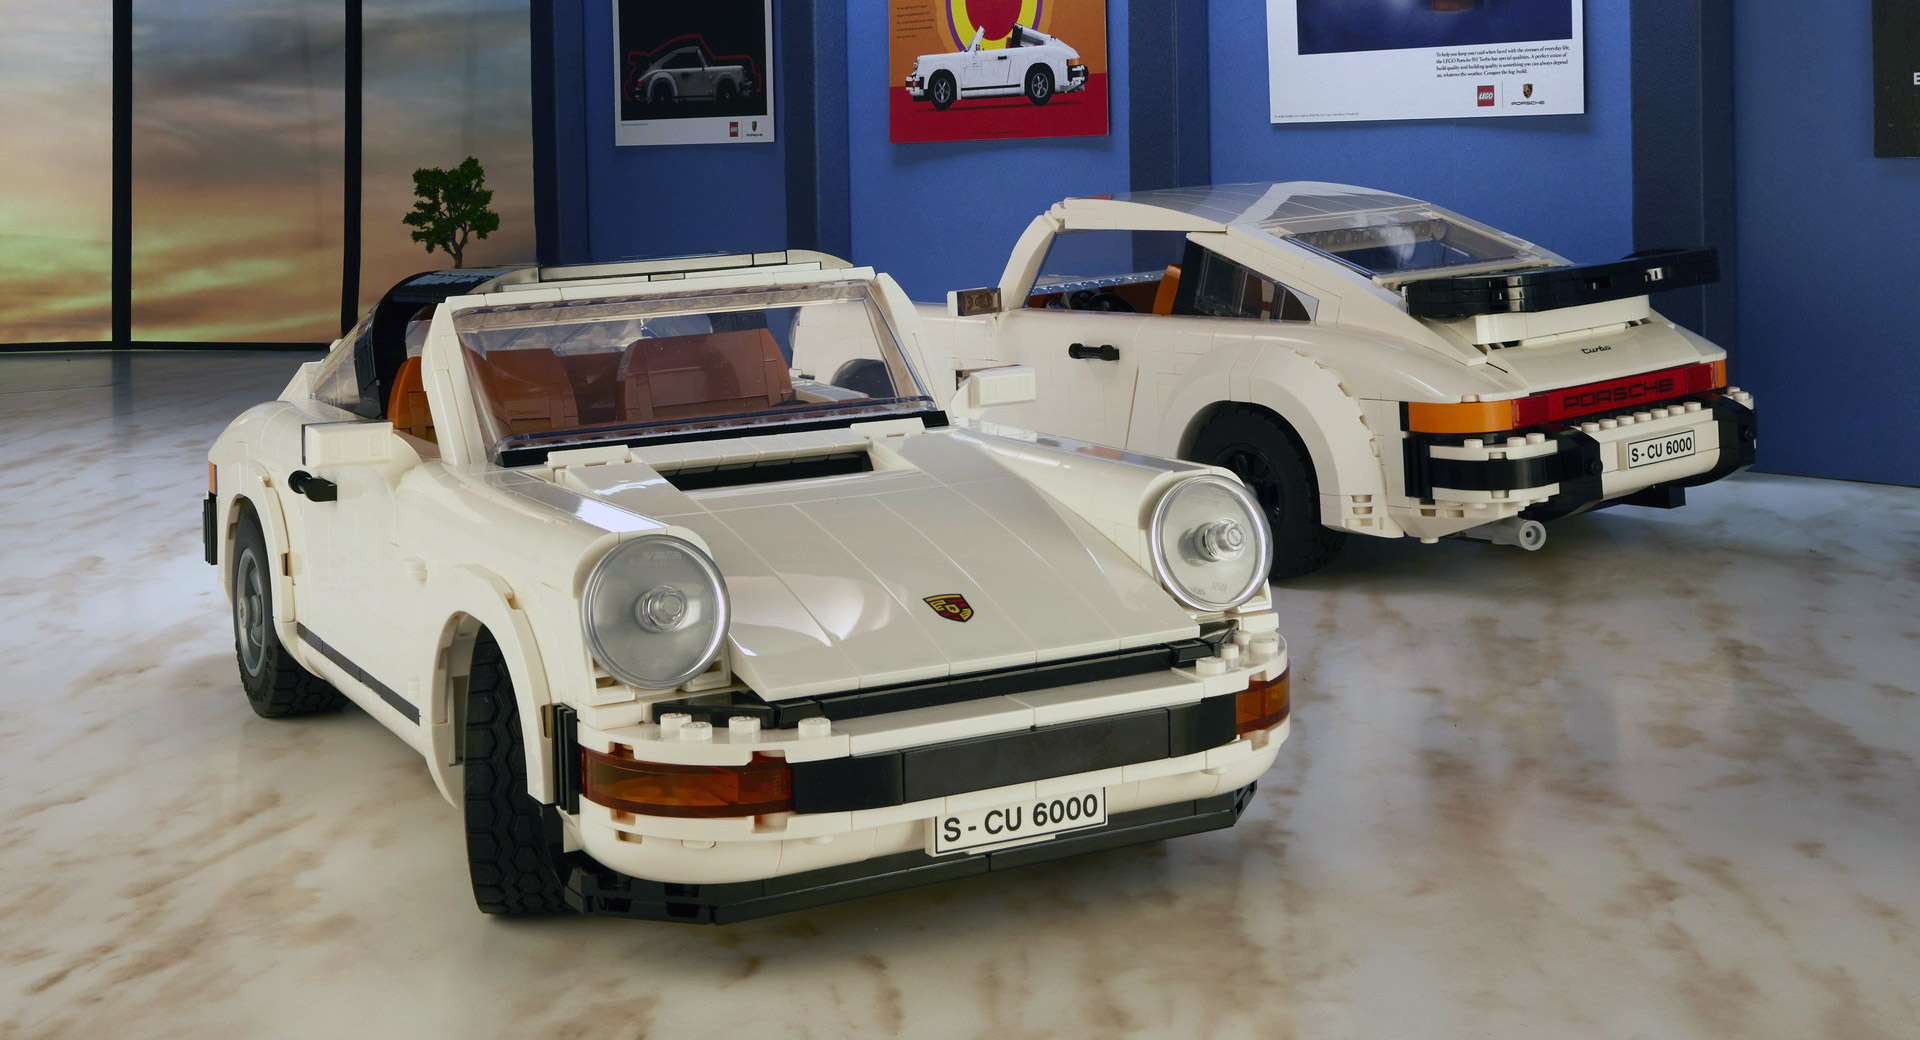 Lego and Porsche's Latest Kit Gets You Two 911s for the Price of One